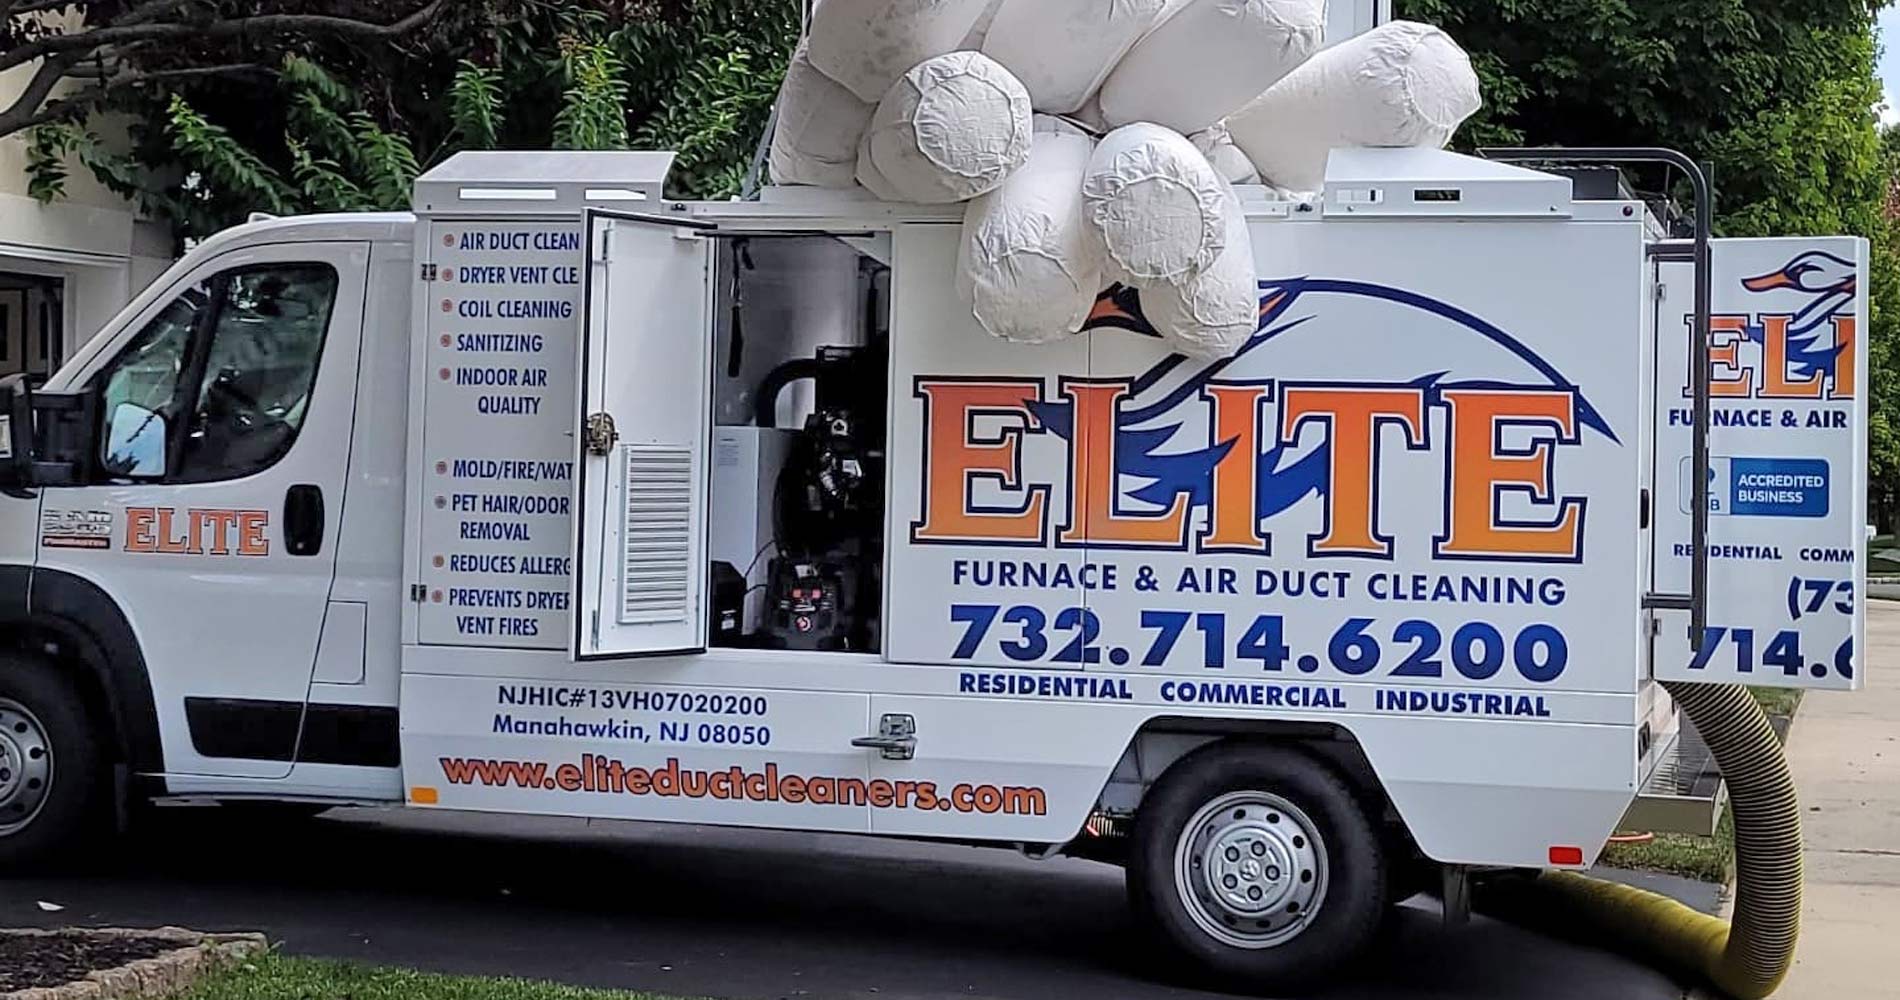 Central Jersey Air Duct & Dryer Vent Cleaning | Elite Furnace & Air Duct  Cleaning